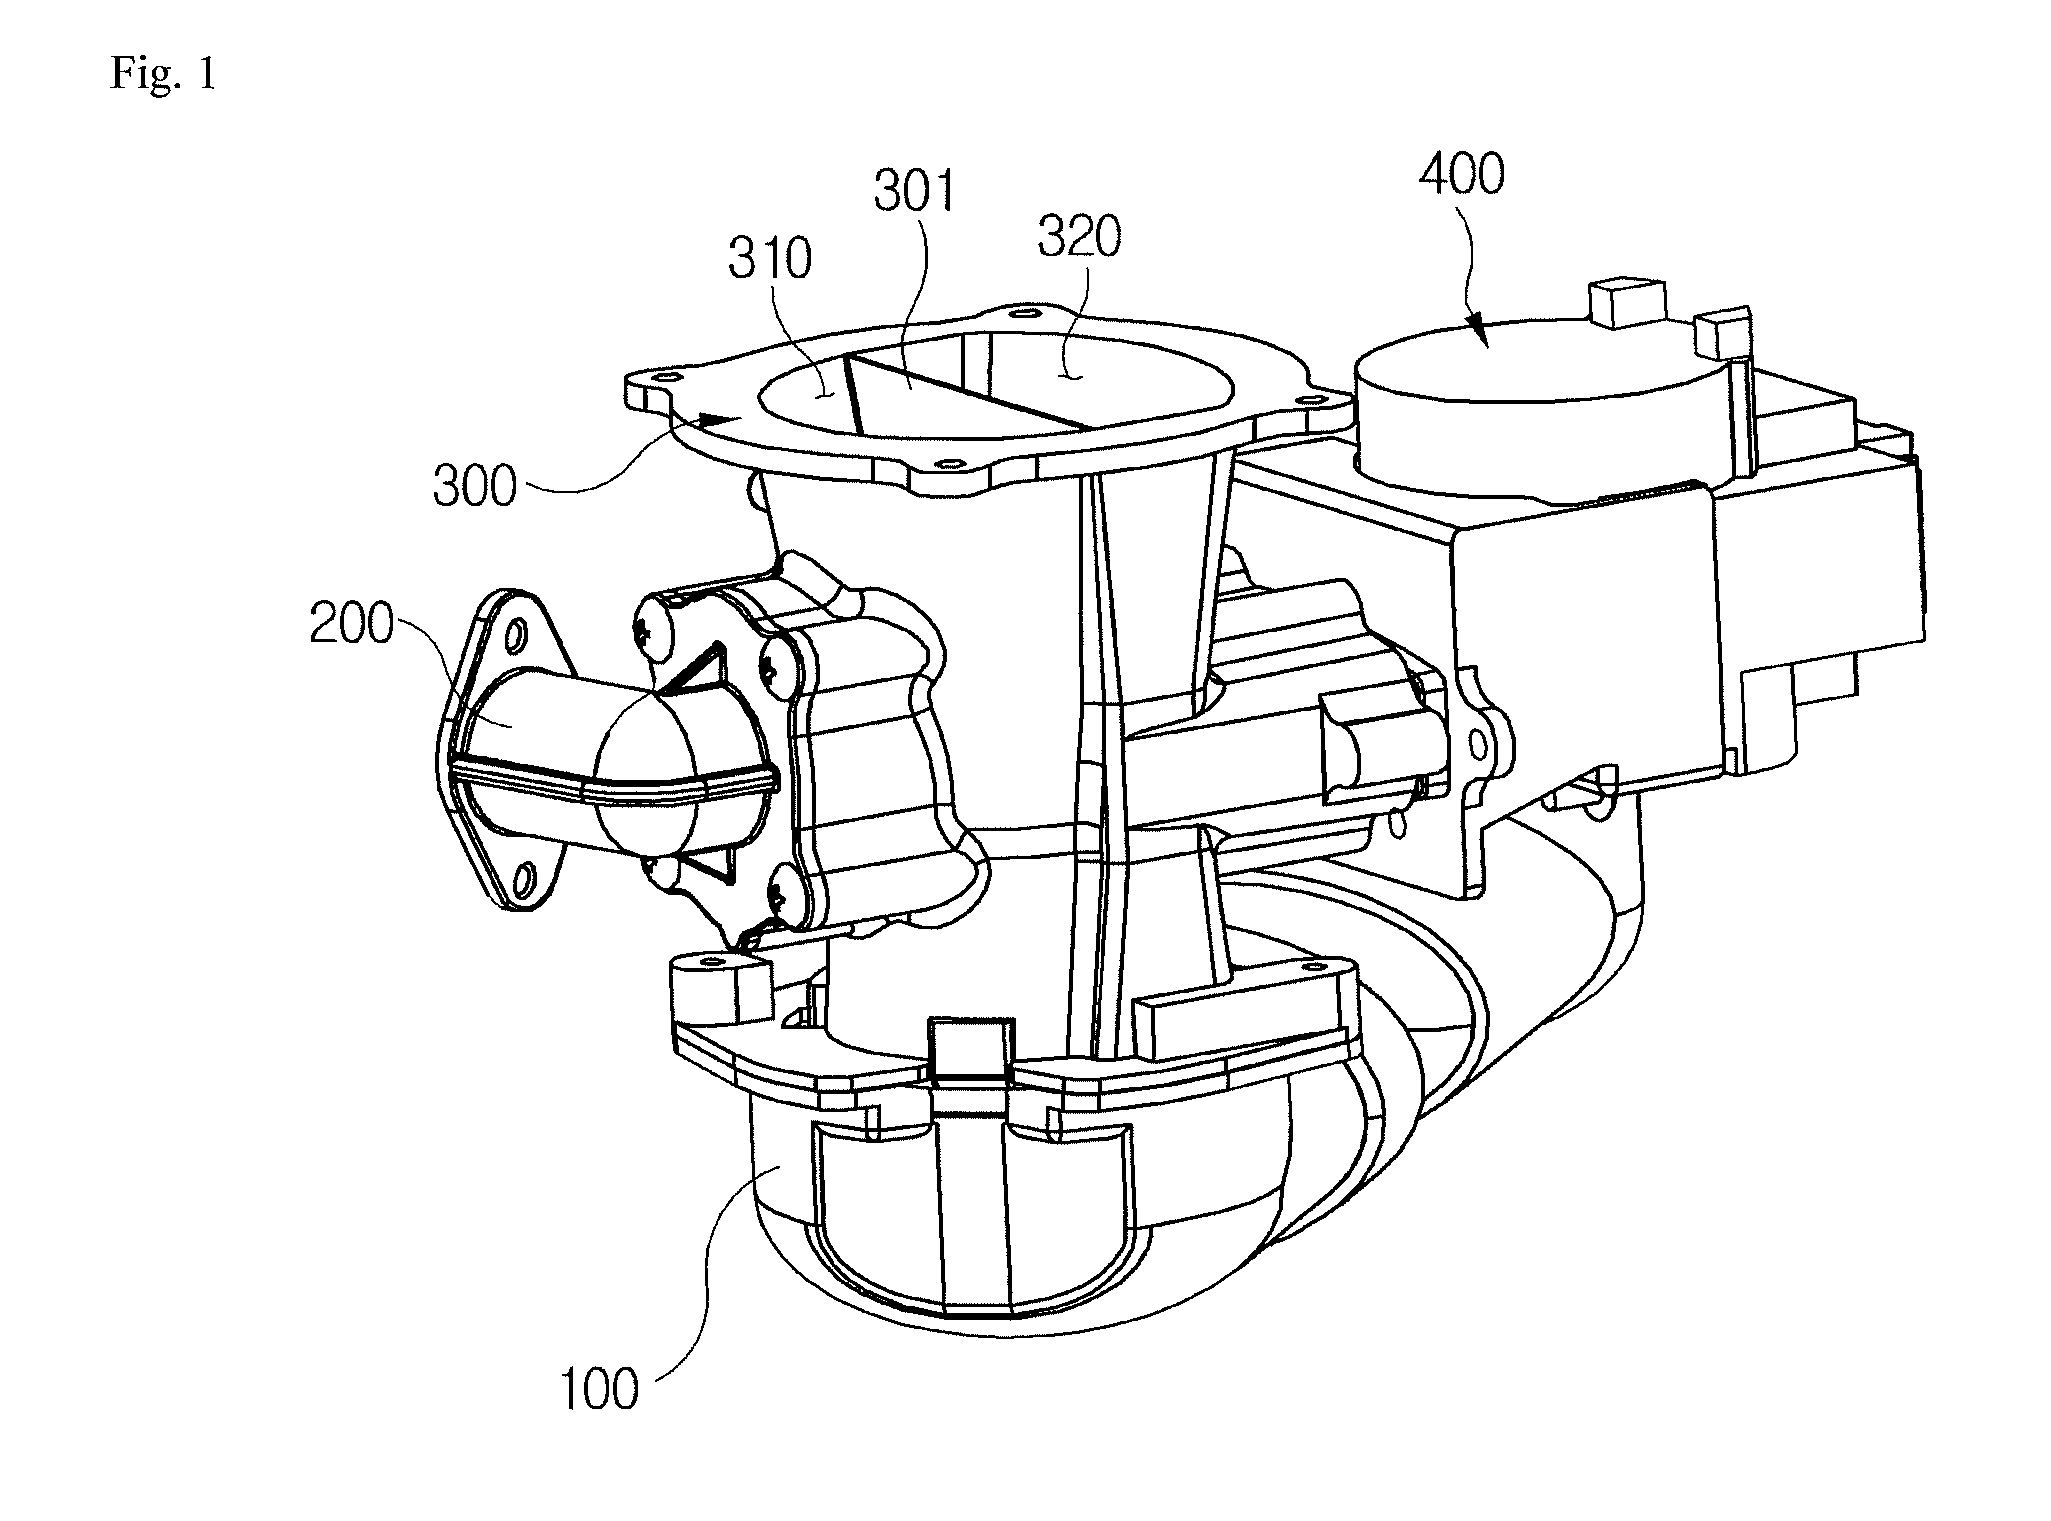 Combustion device for improving turndown ratio